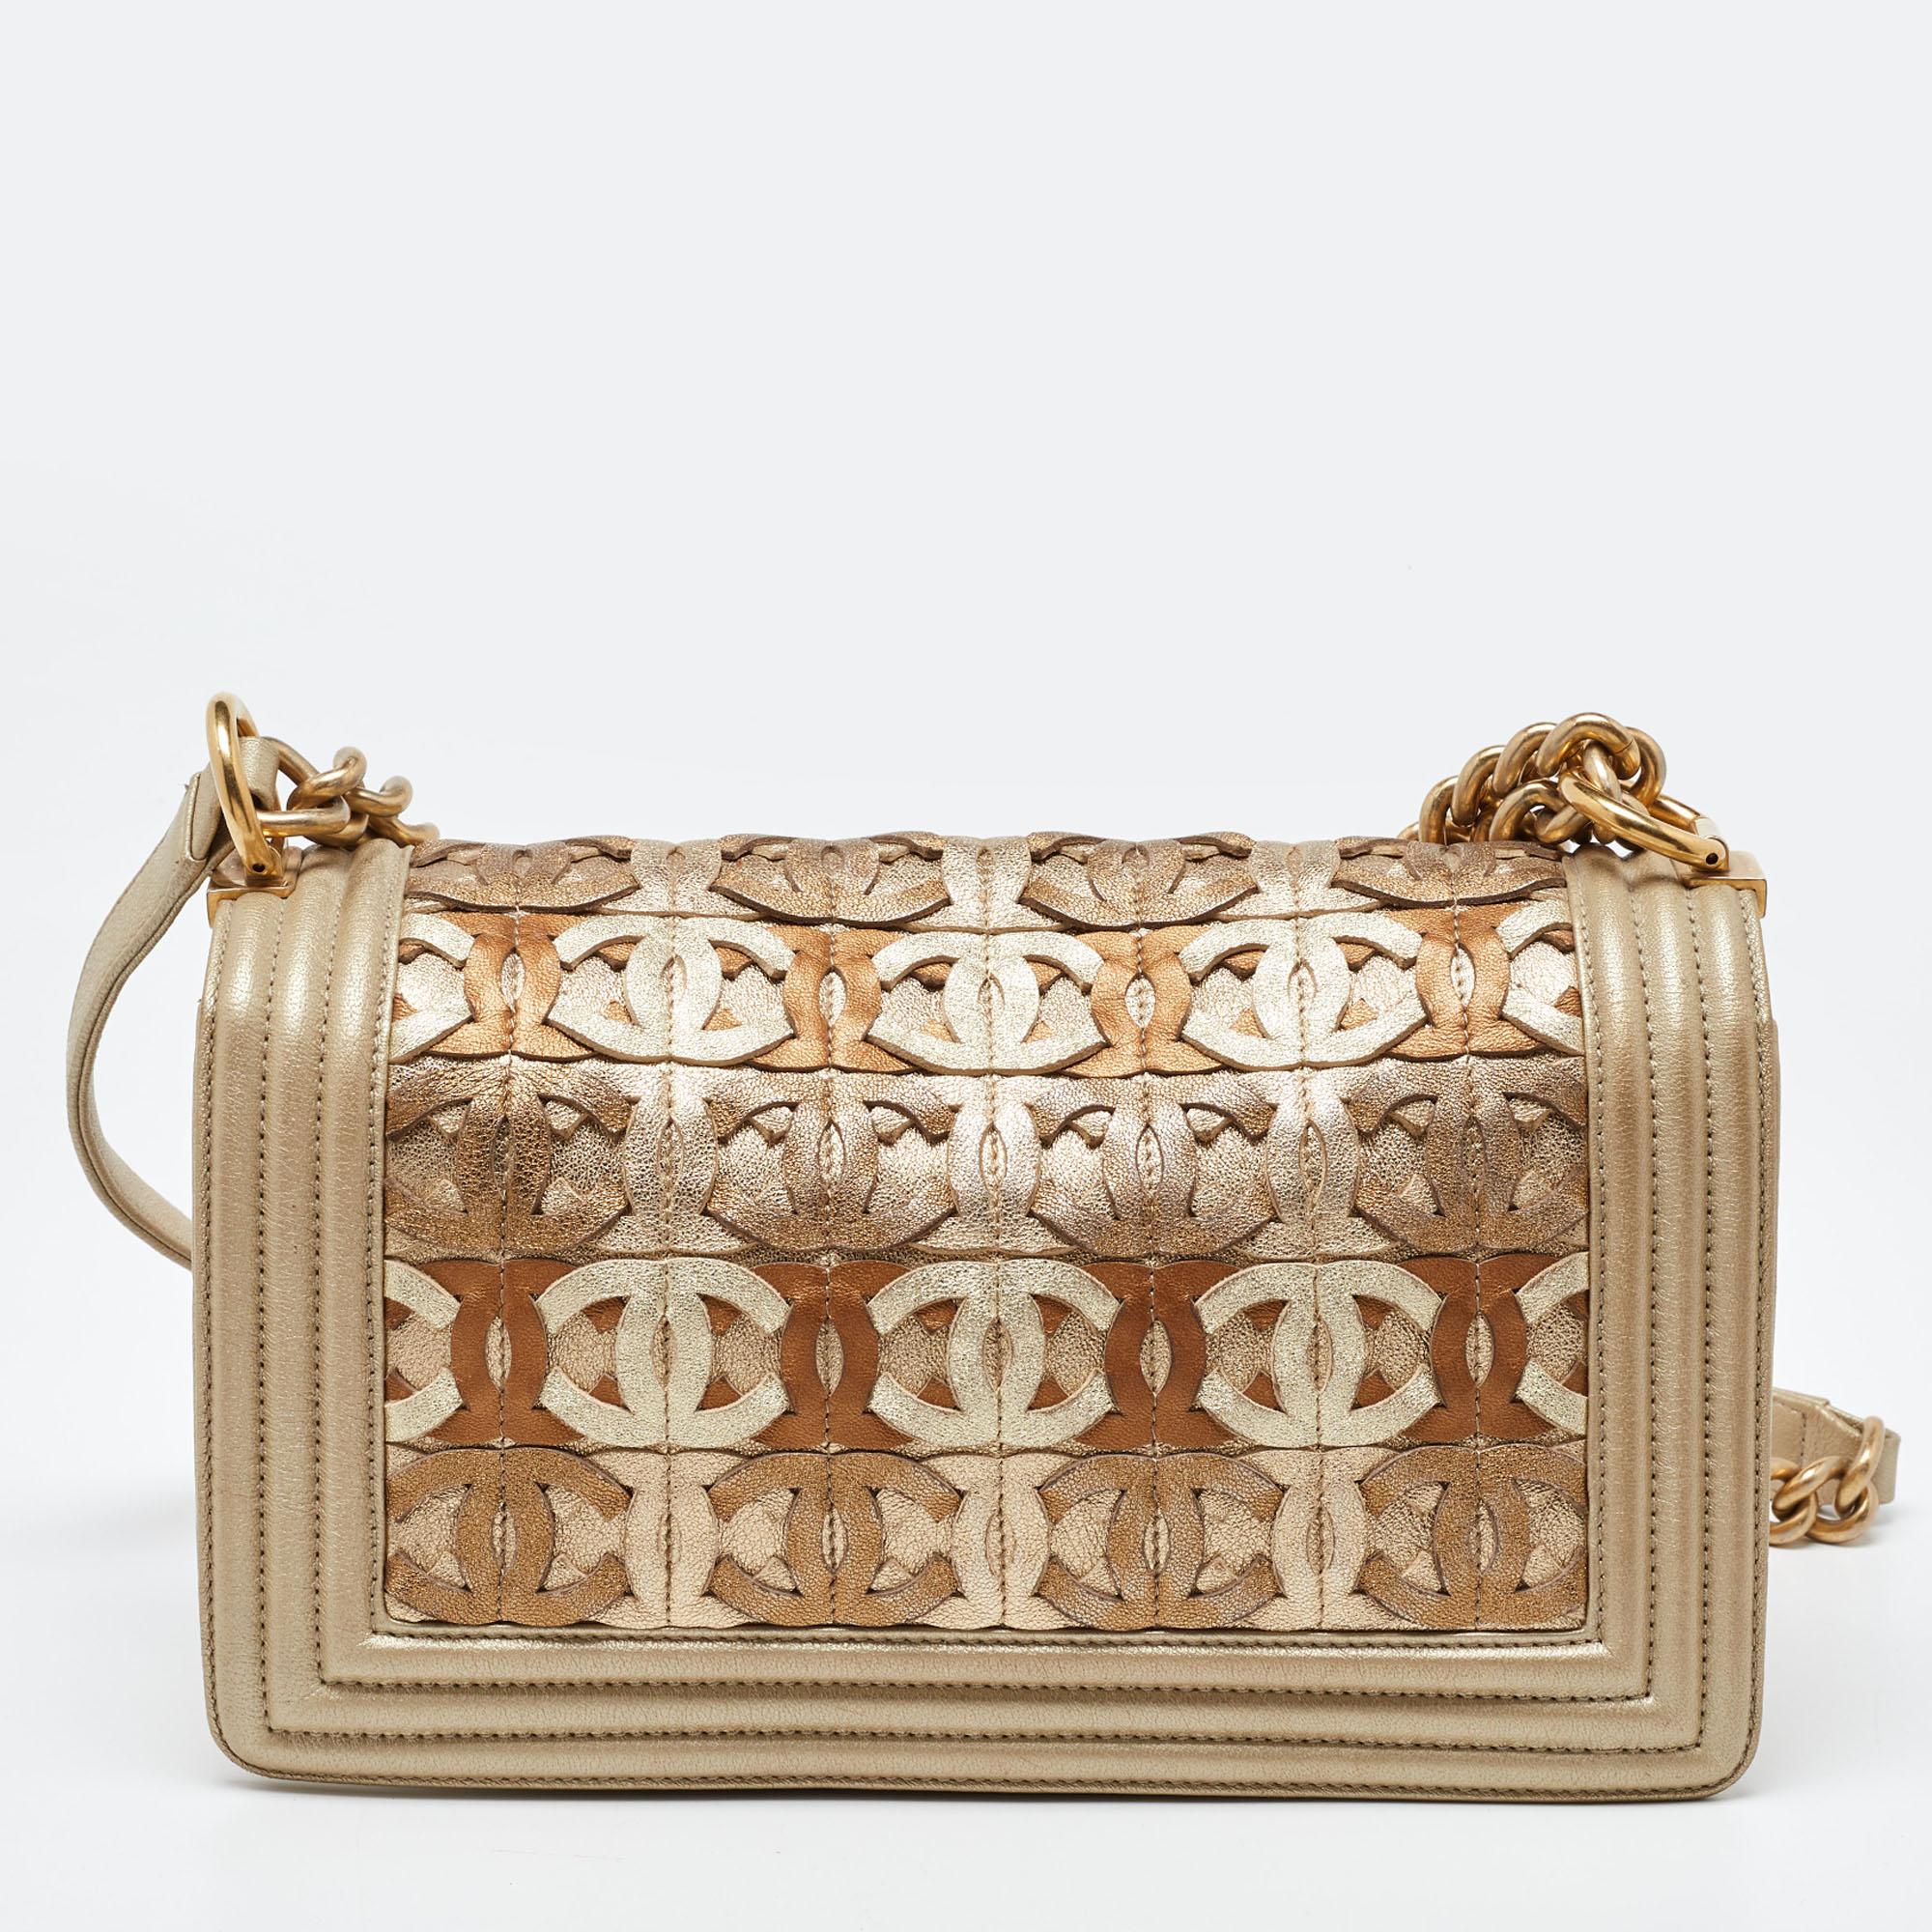 Carry everything you need in style thanks to this Chanel Gold Boy Flap Bag. Crafted from the best materials, this is an accessory that promises enduring style and usage.

